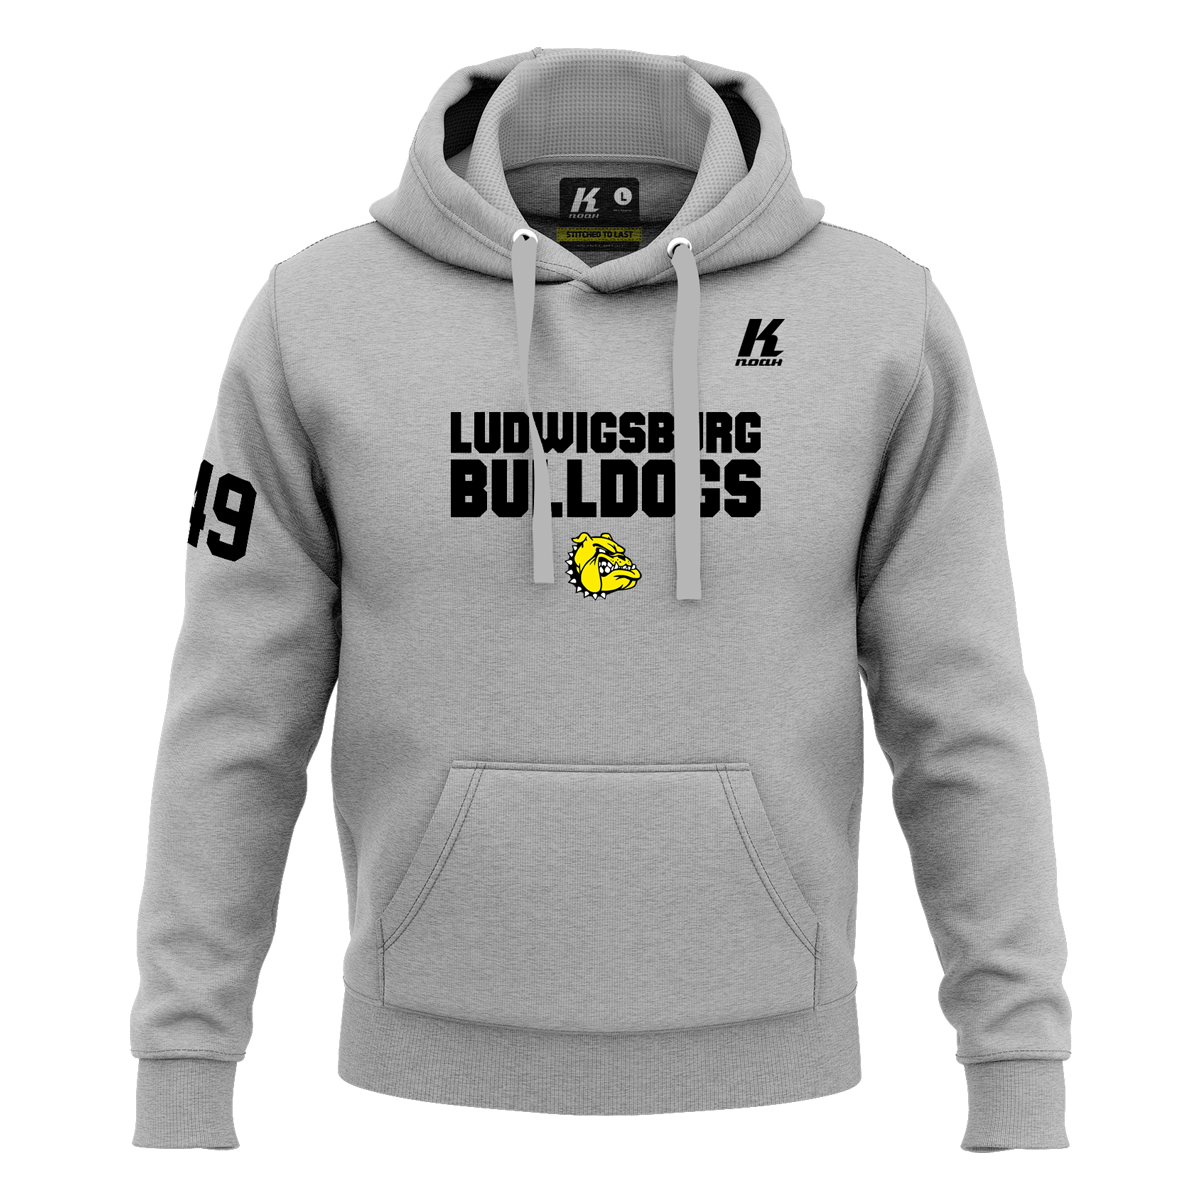 LB-Bulldogs Signature Series Hoodie grey with Playernumber/Initials